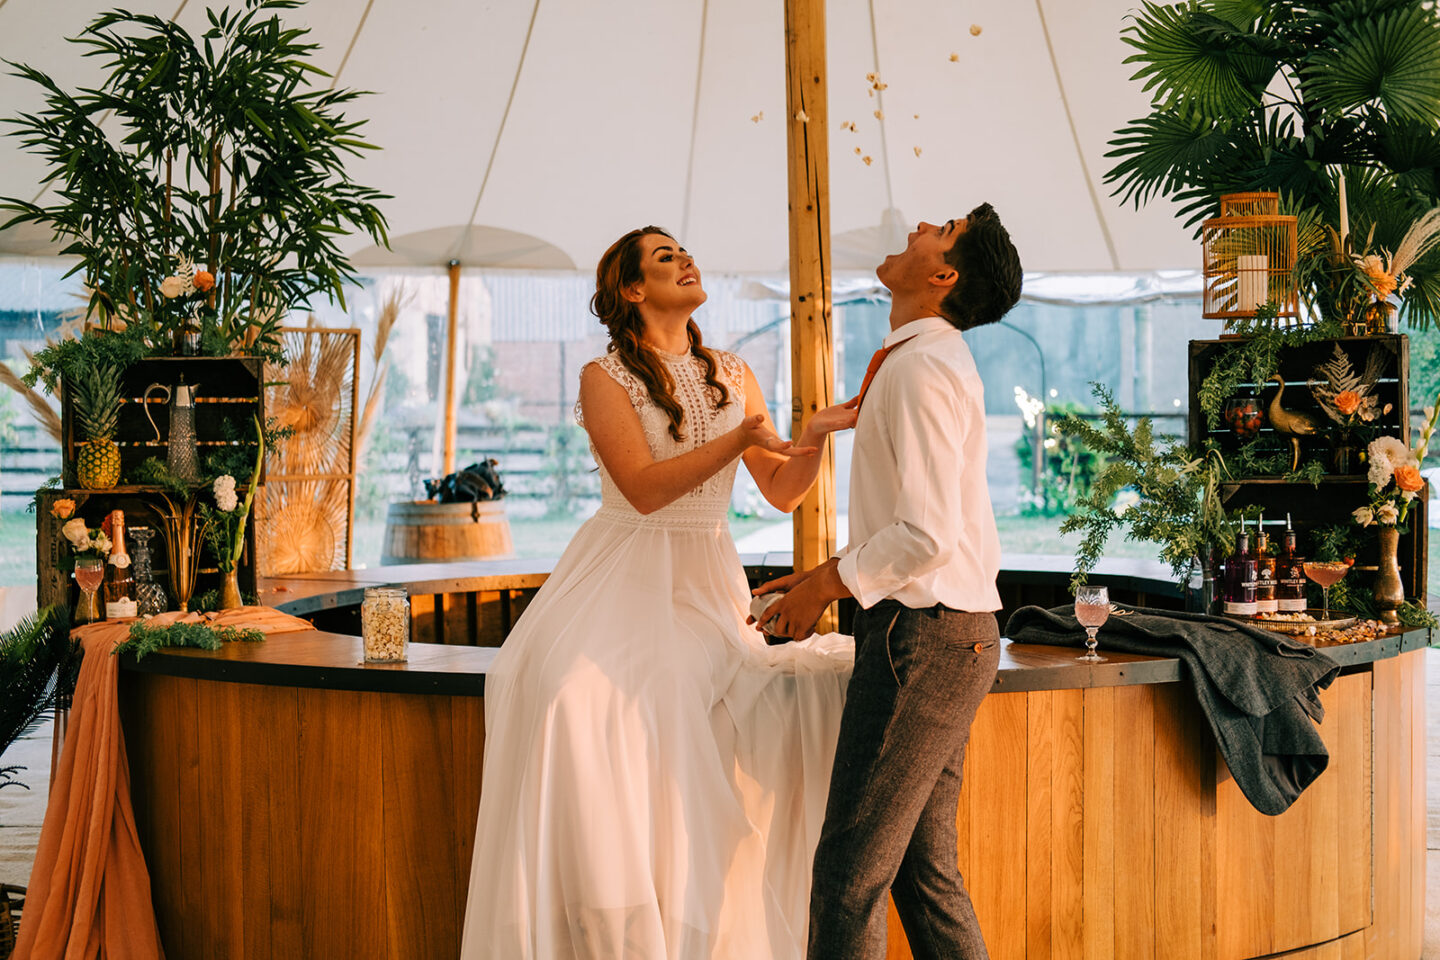 Eco-Friendly Wedding With Festival Vibes at Willow Grange Farm Cambridge